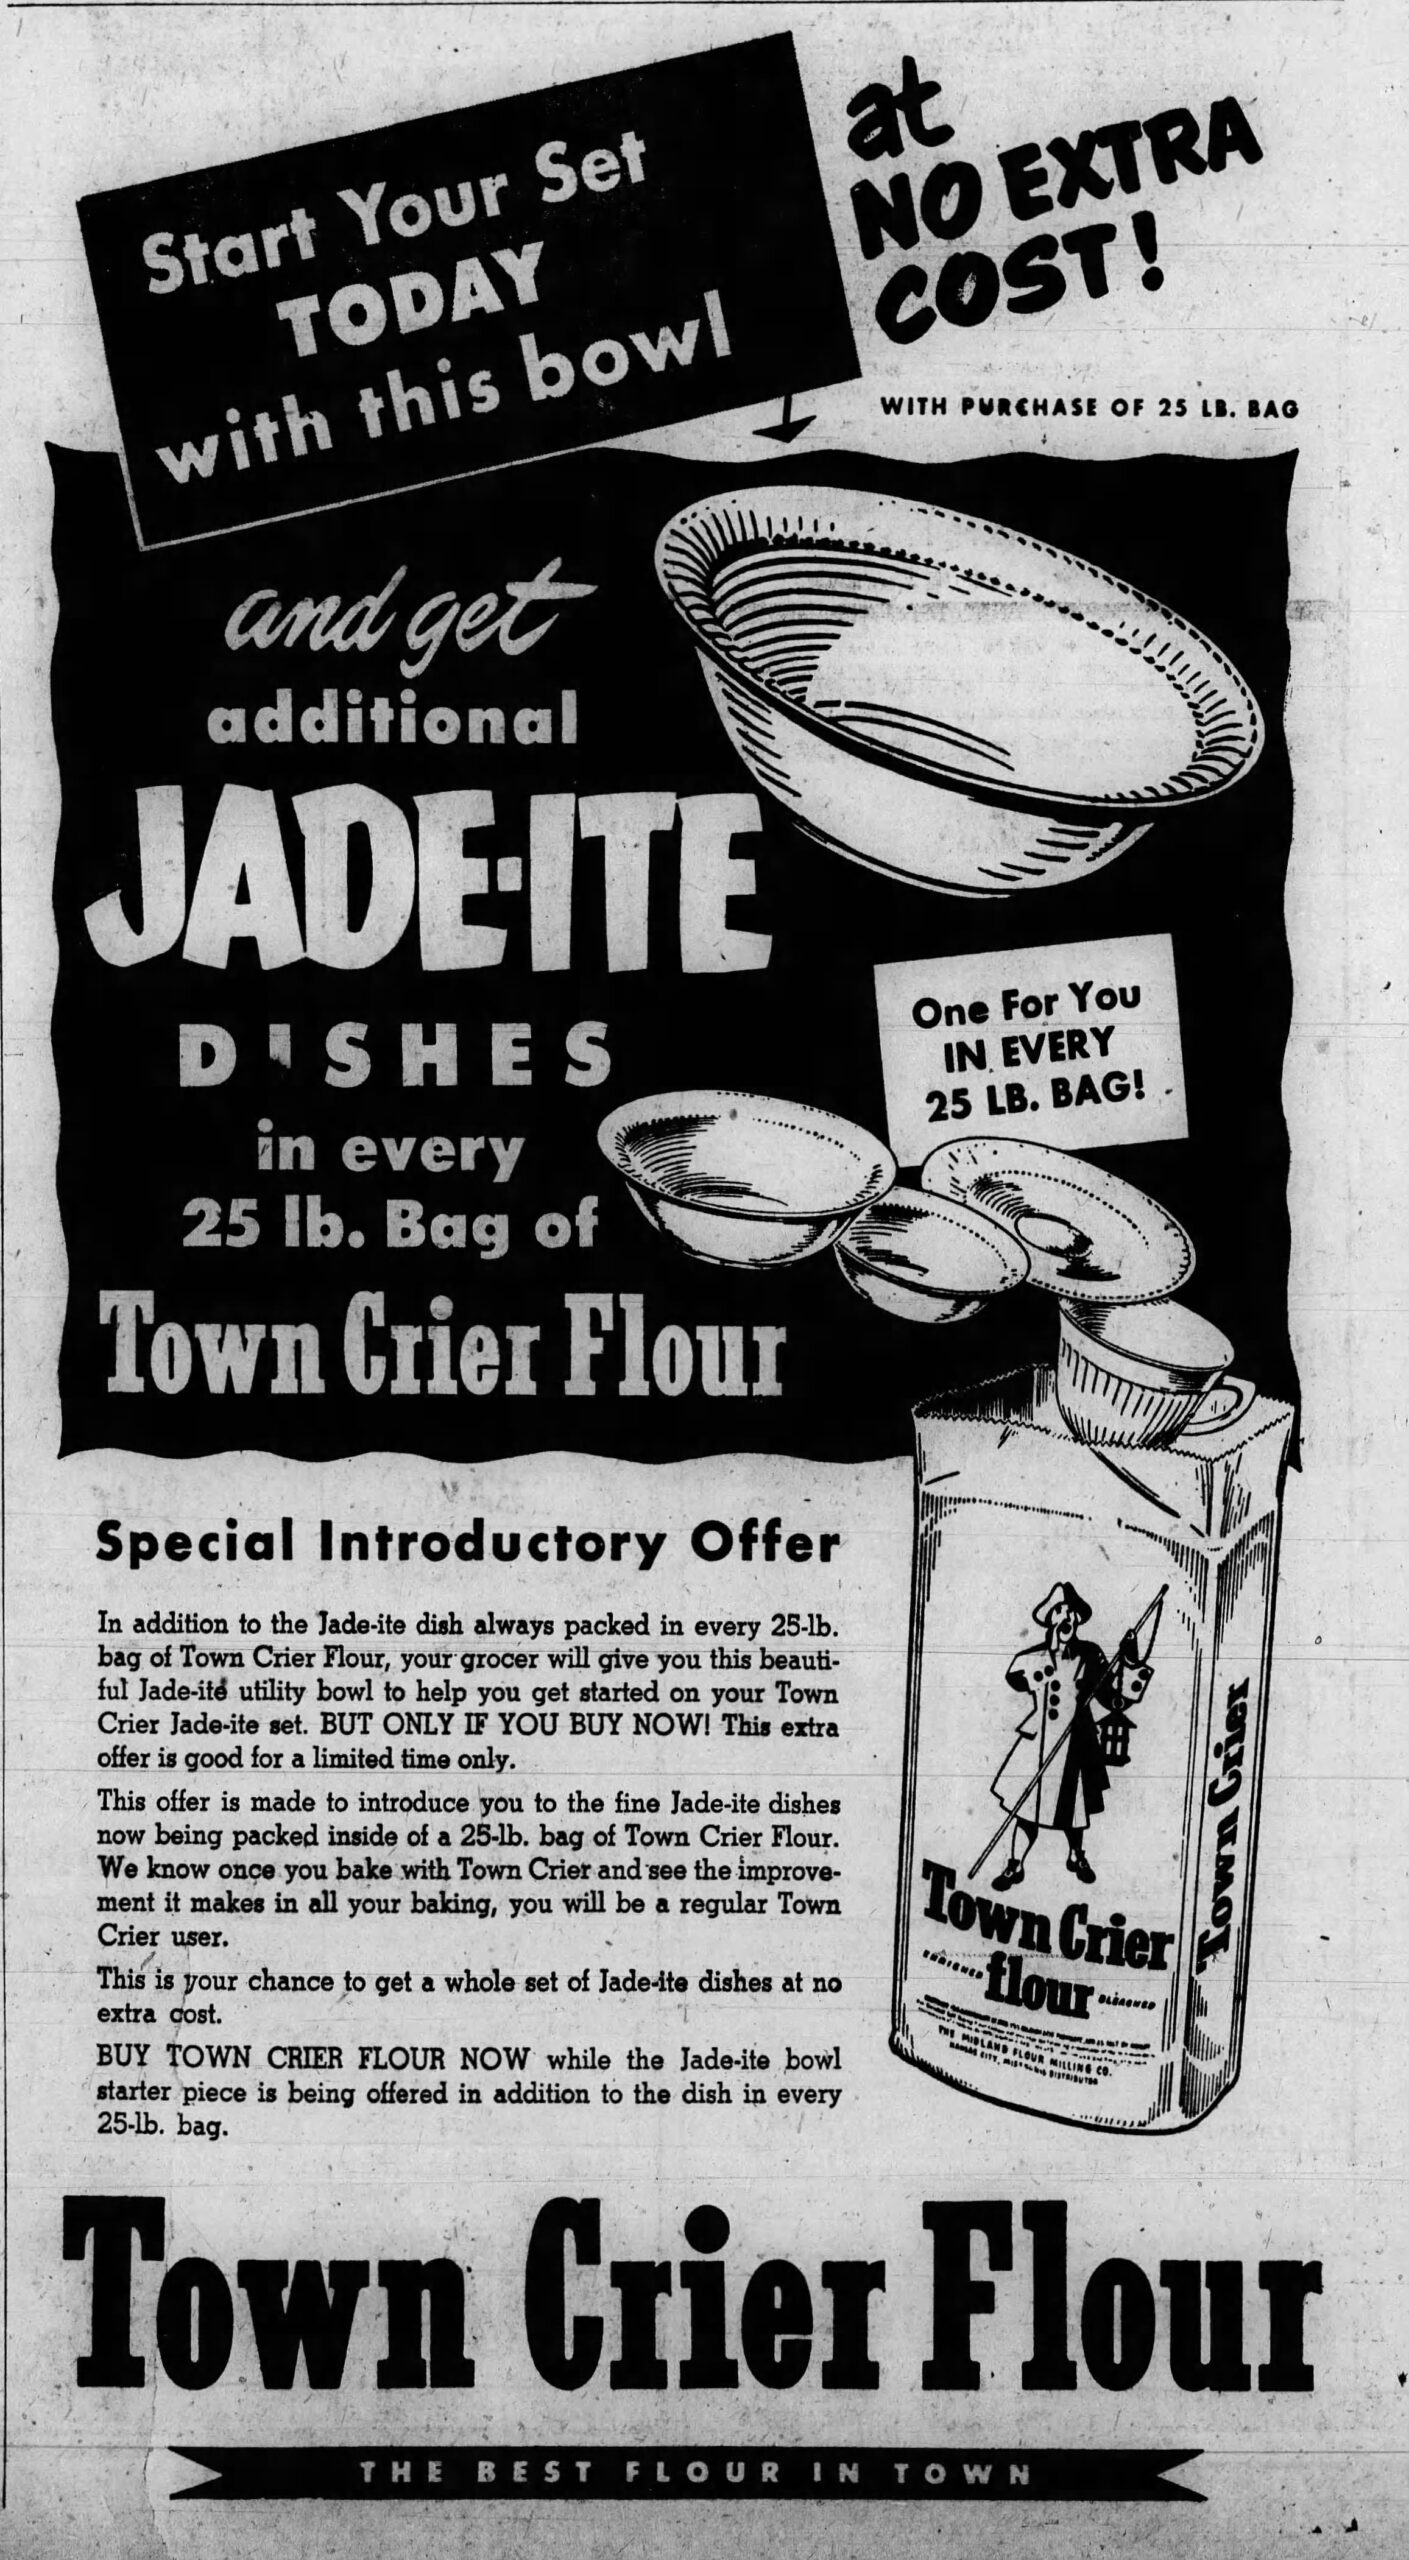 Newspaper Ad for Jane Ray Jadeite Dishes in Town Crier Flour